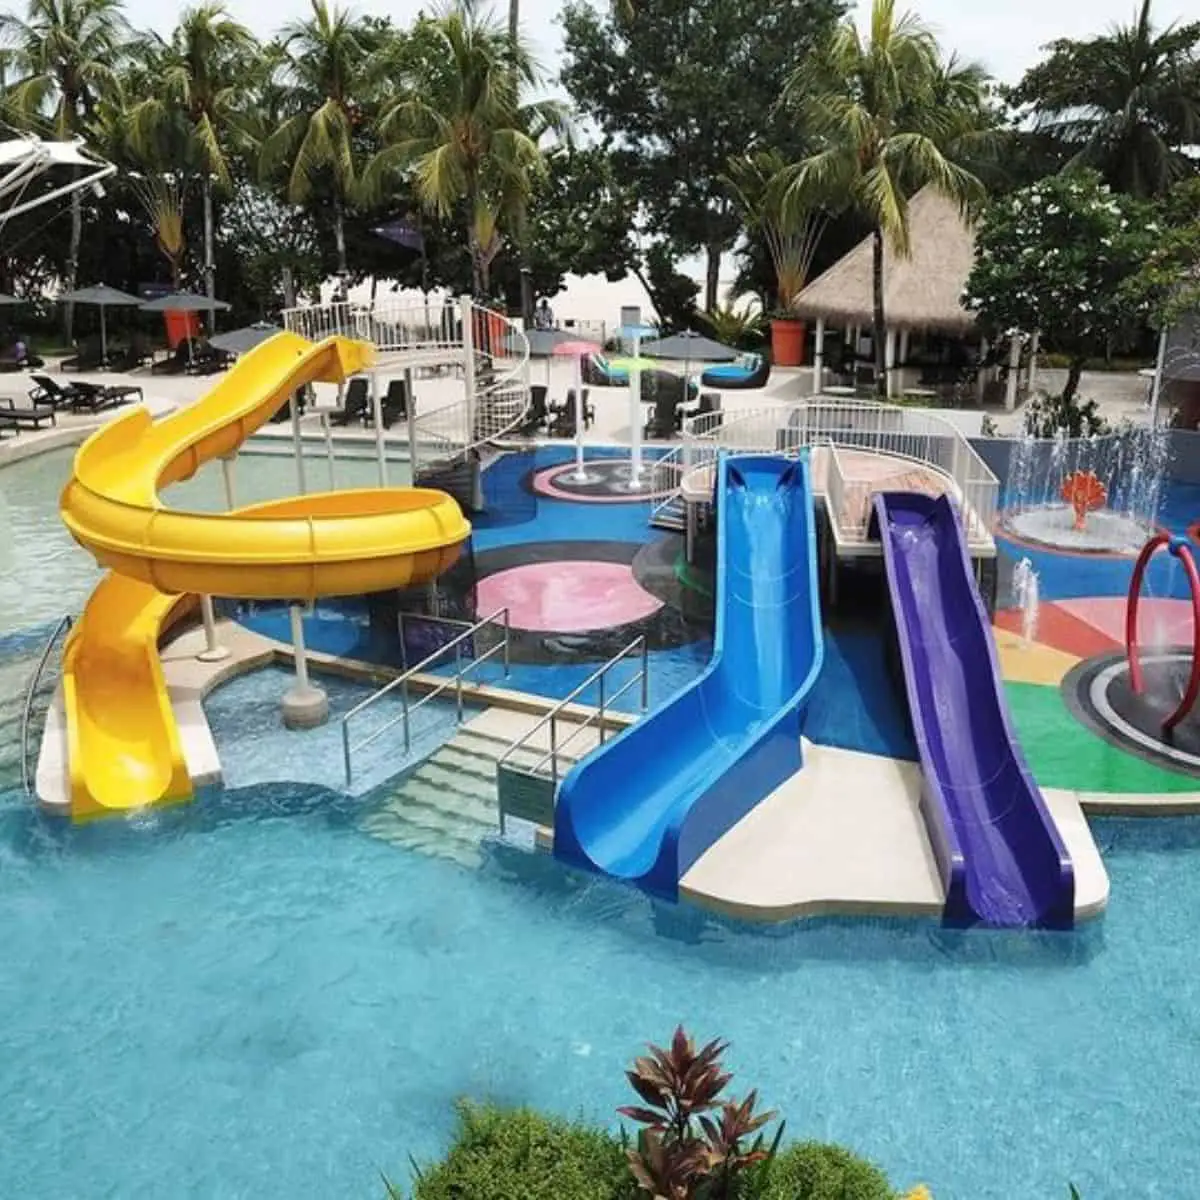 Gigantic water park in Hard Rock Hotel Penang with colourful slides